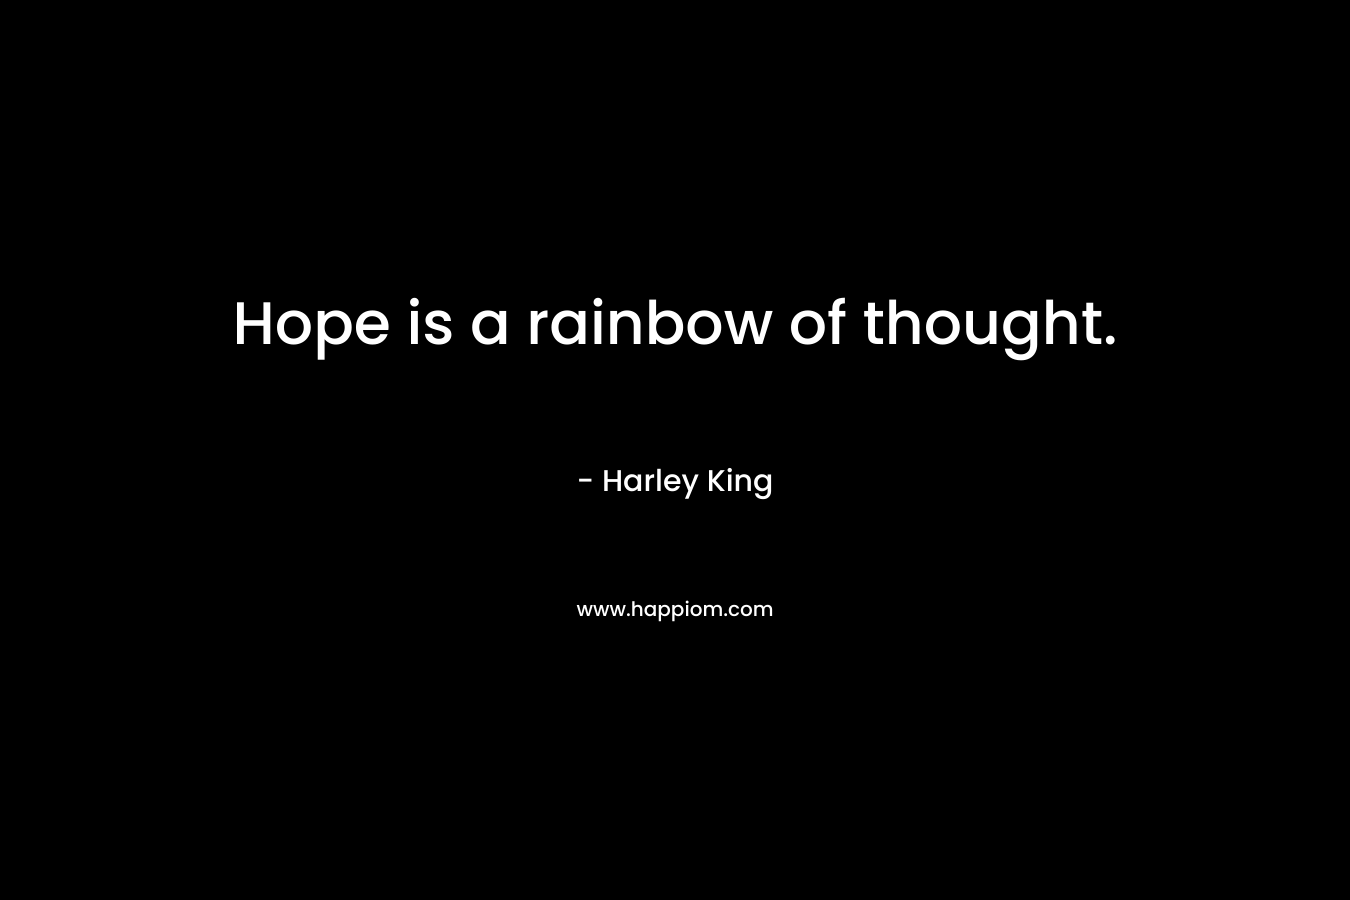 Hope is a rainbow of thought. – Harley King